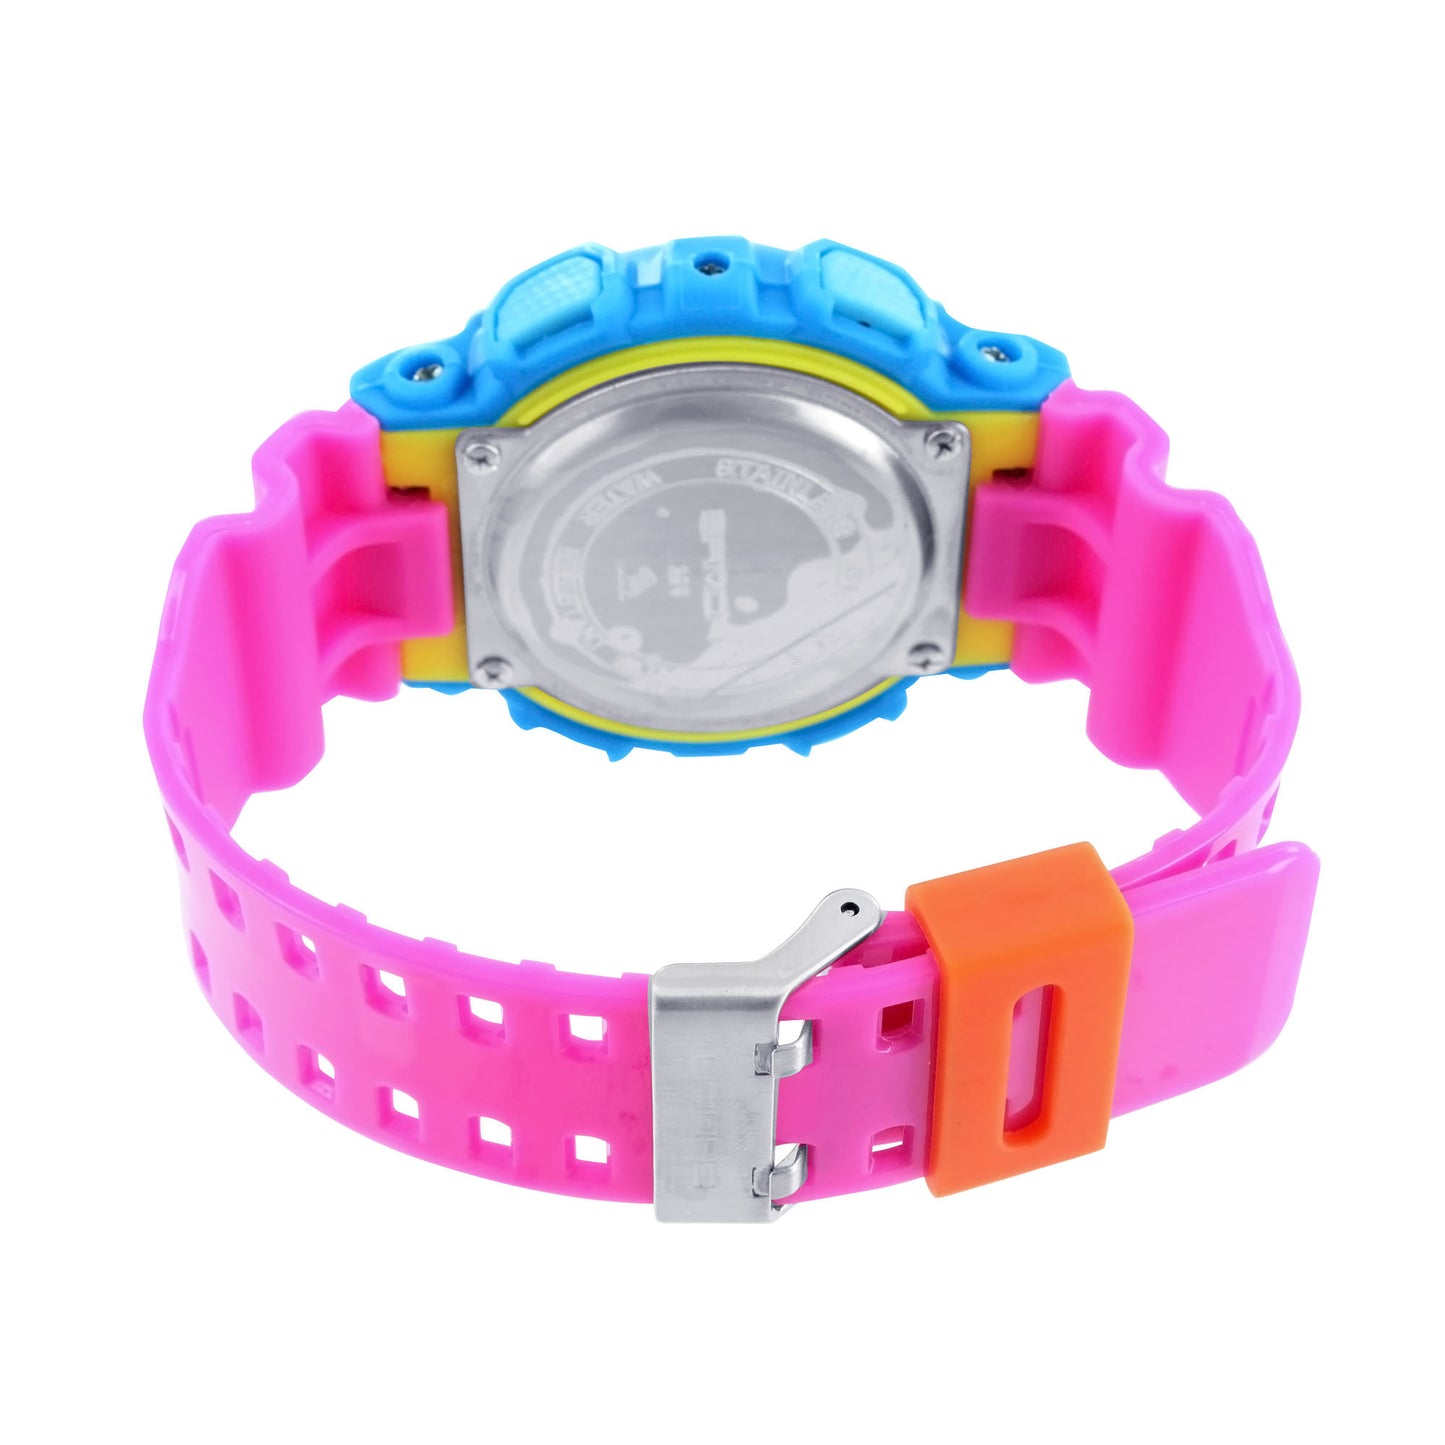 Pink Blue Shock Water Resistant Digital Watch Round Face Teen Gift